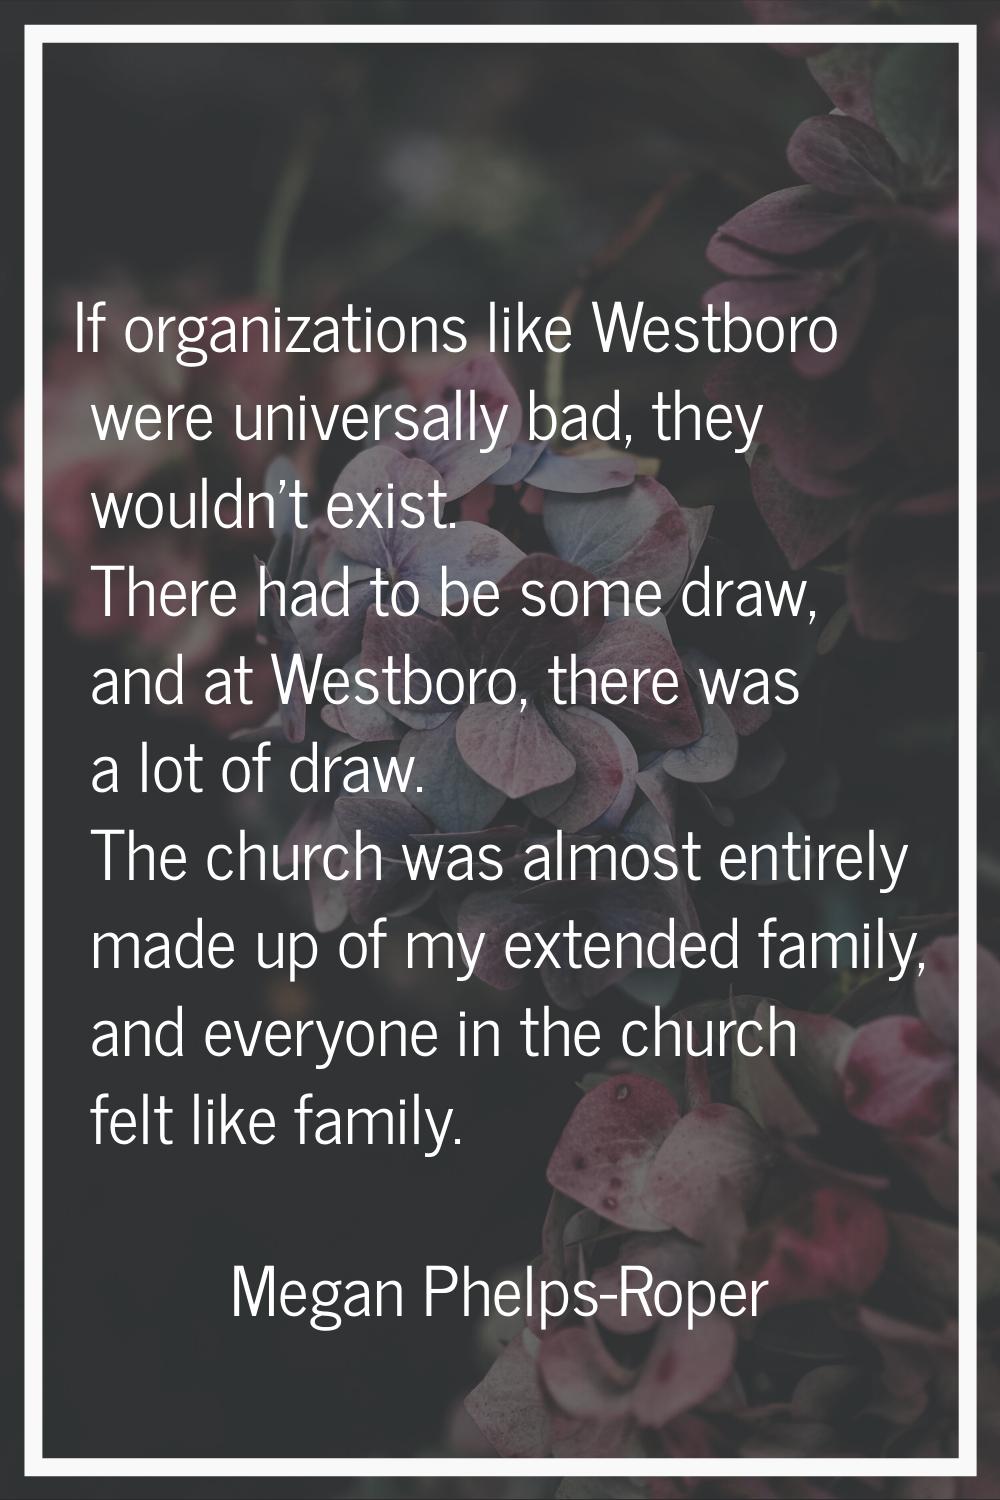 If organizations like Westboro were universally bad, they wouldn't exist. There had to be some draw